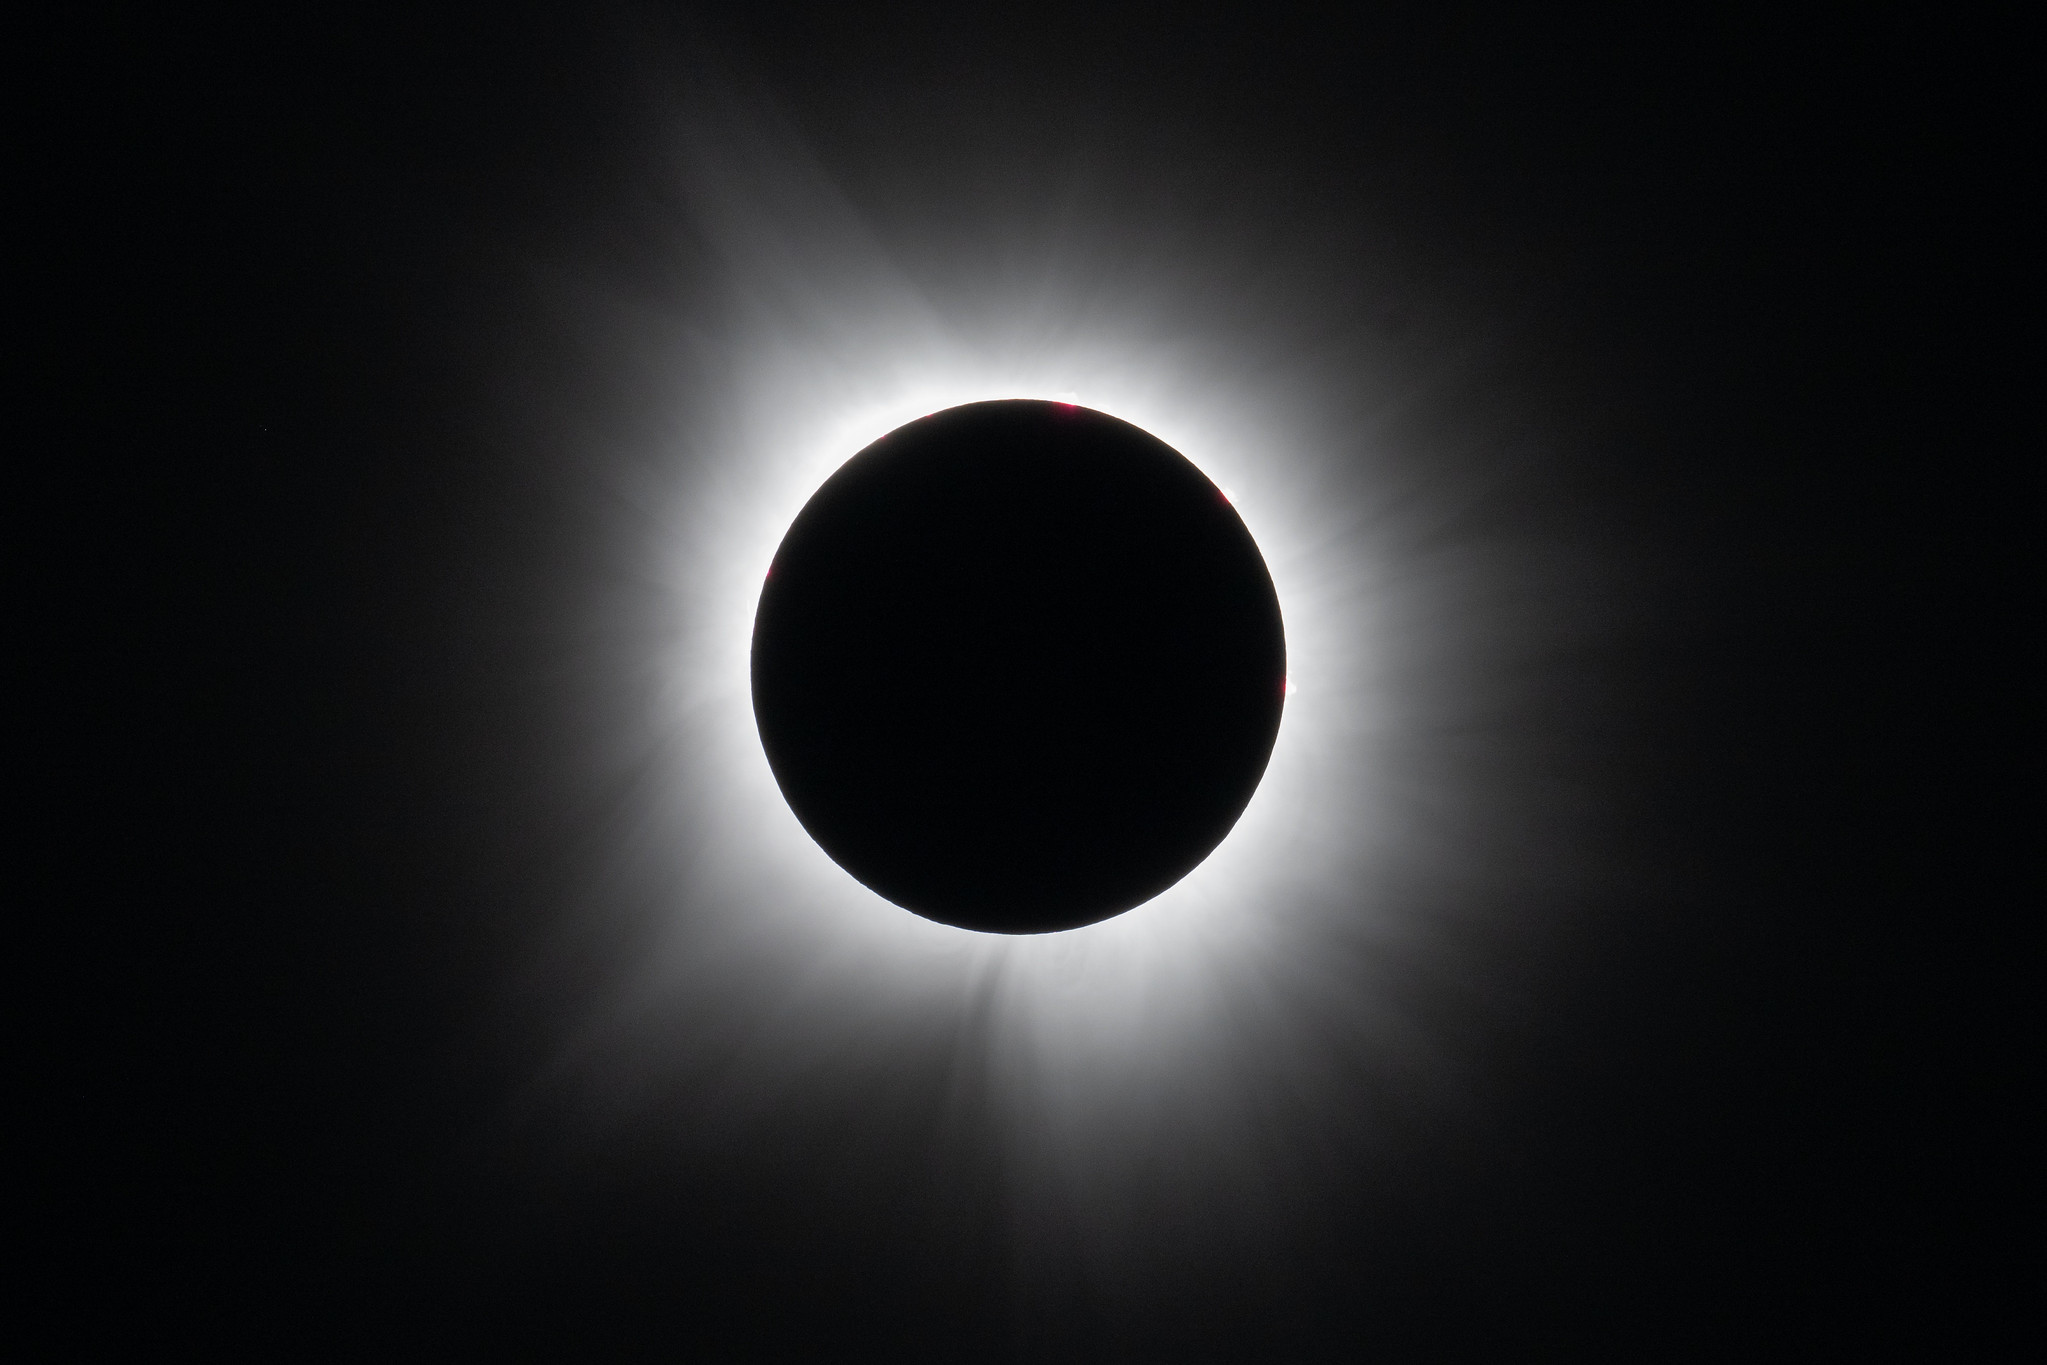 Posts Misrepresent Views of Eclipse With Composite Images - FactCheck.org